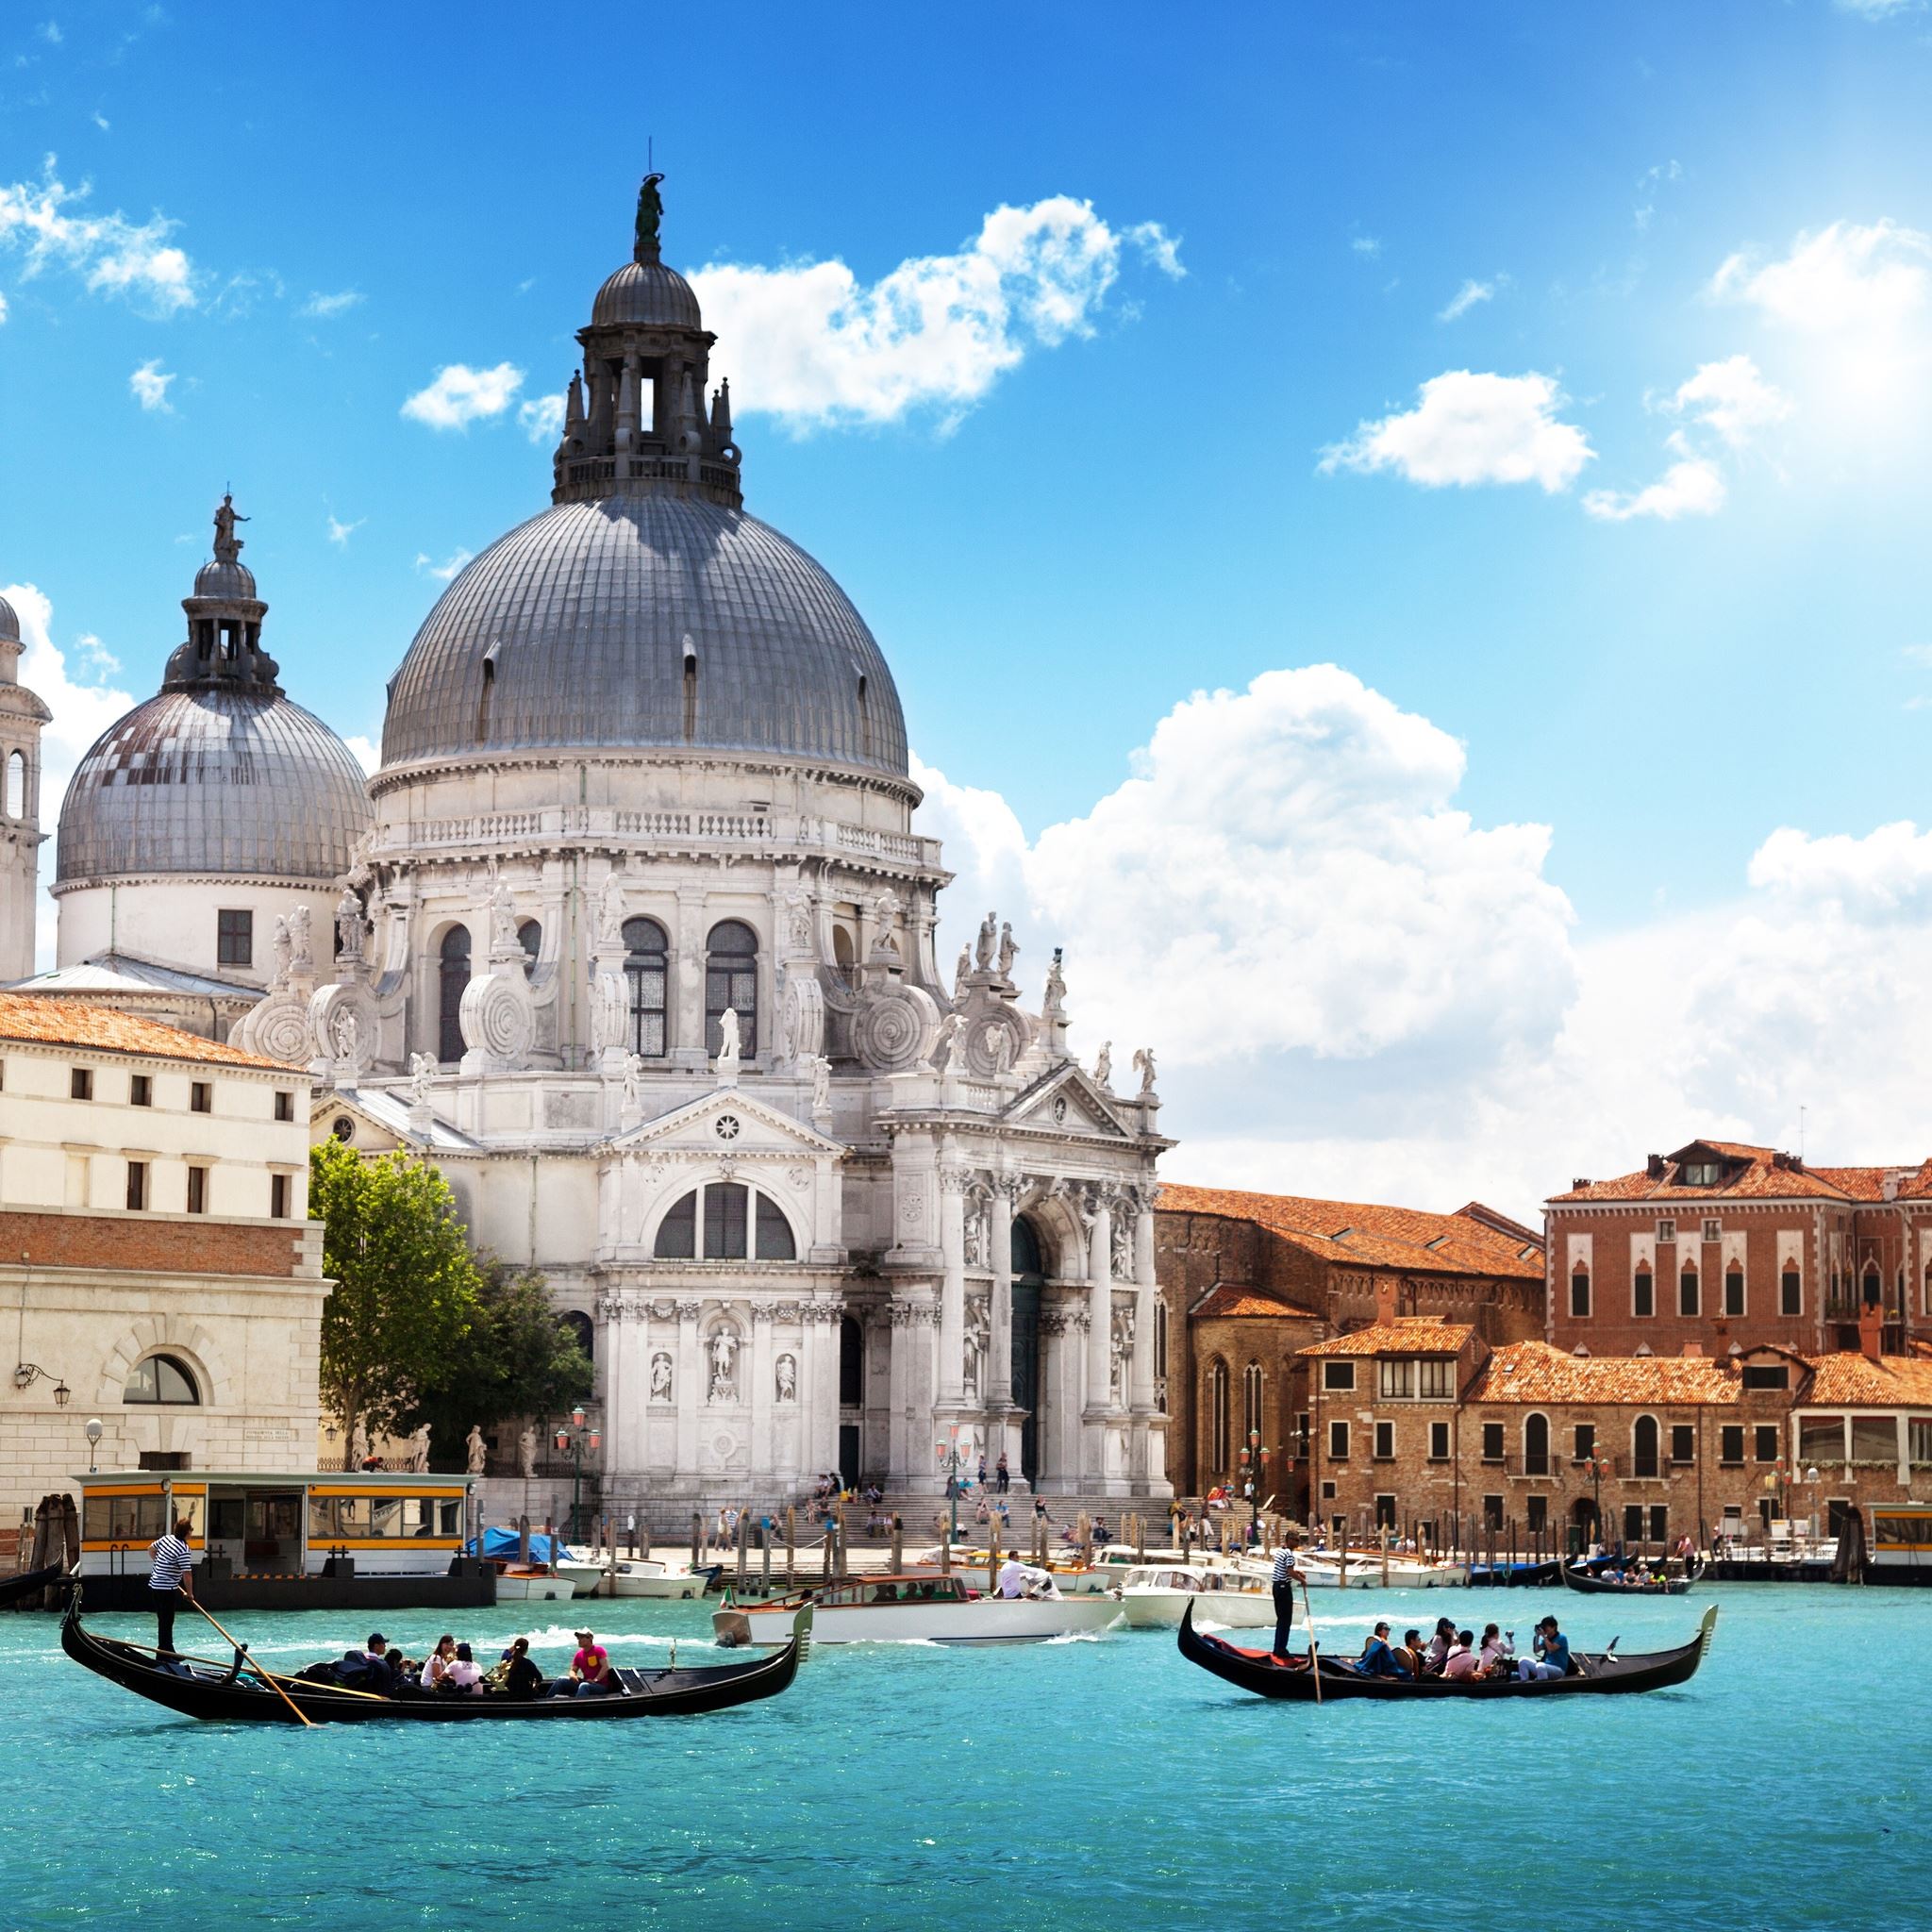 Amazing View from Venice iPad Air wallpaper 